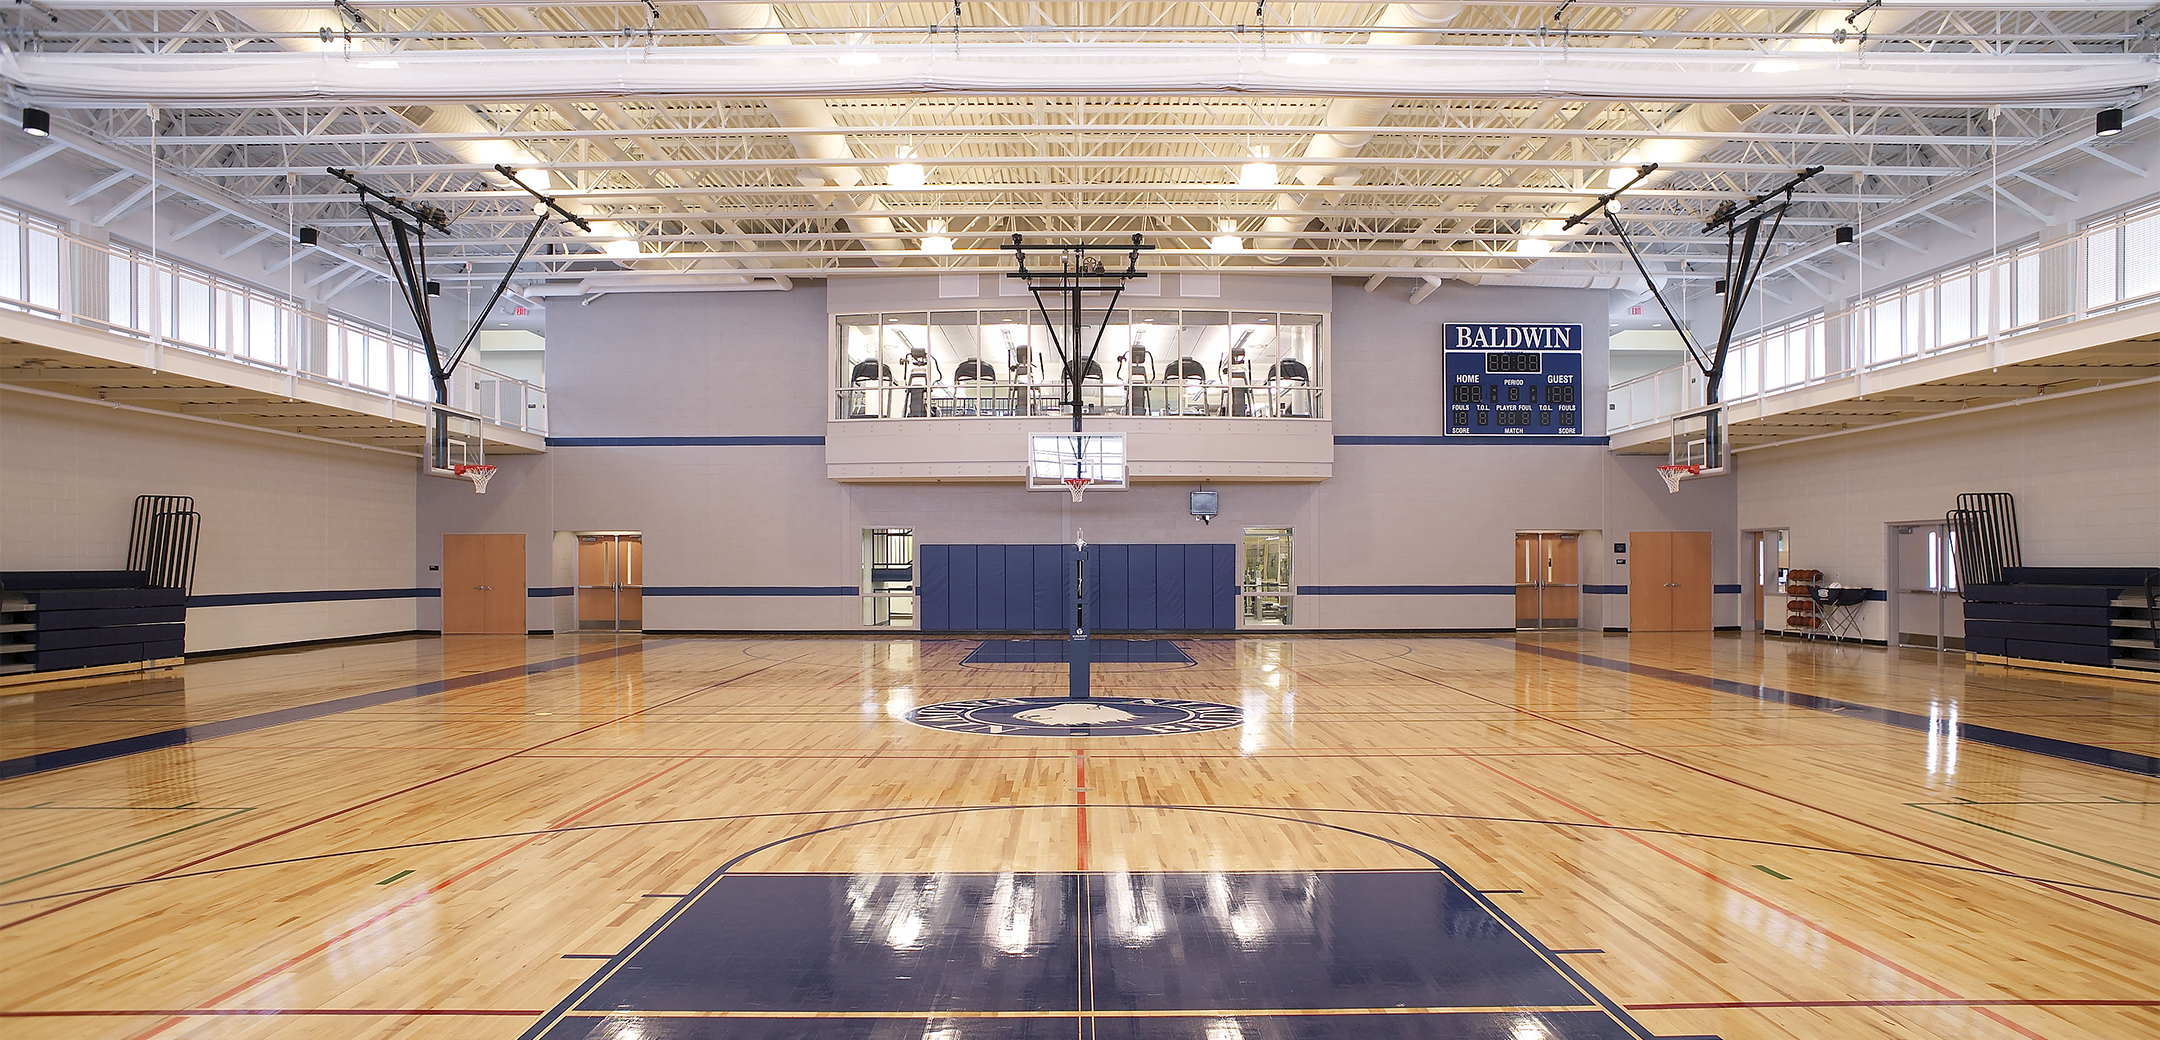 An interior view of the Baldwin School gym, showcasing the lacquered wood flooring, retractable basketball hoops, high ceiling and an elevated gym window in the background.